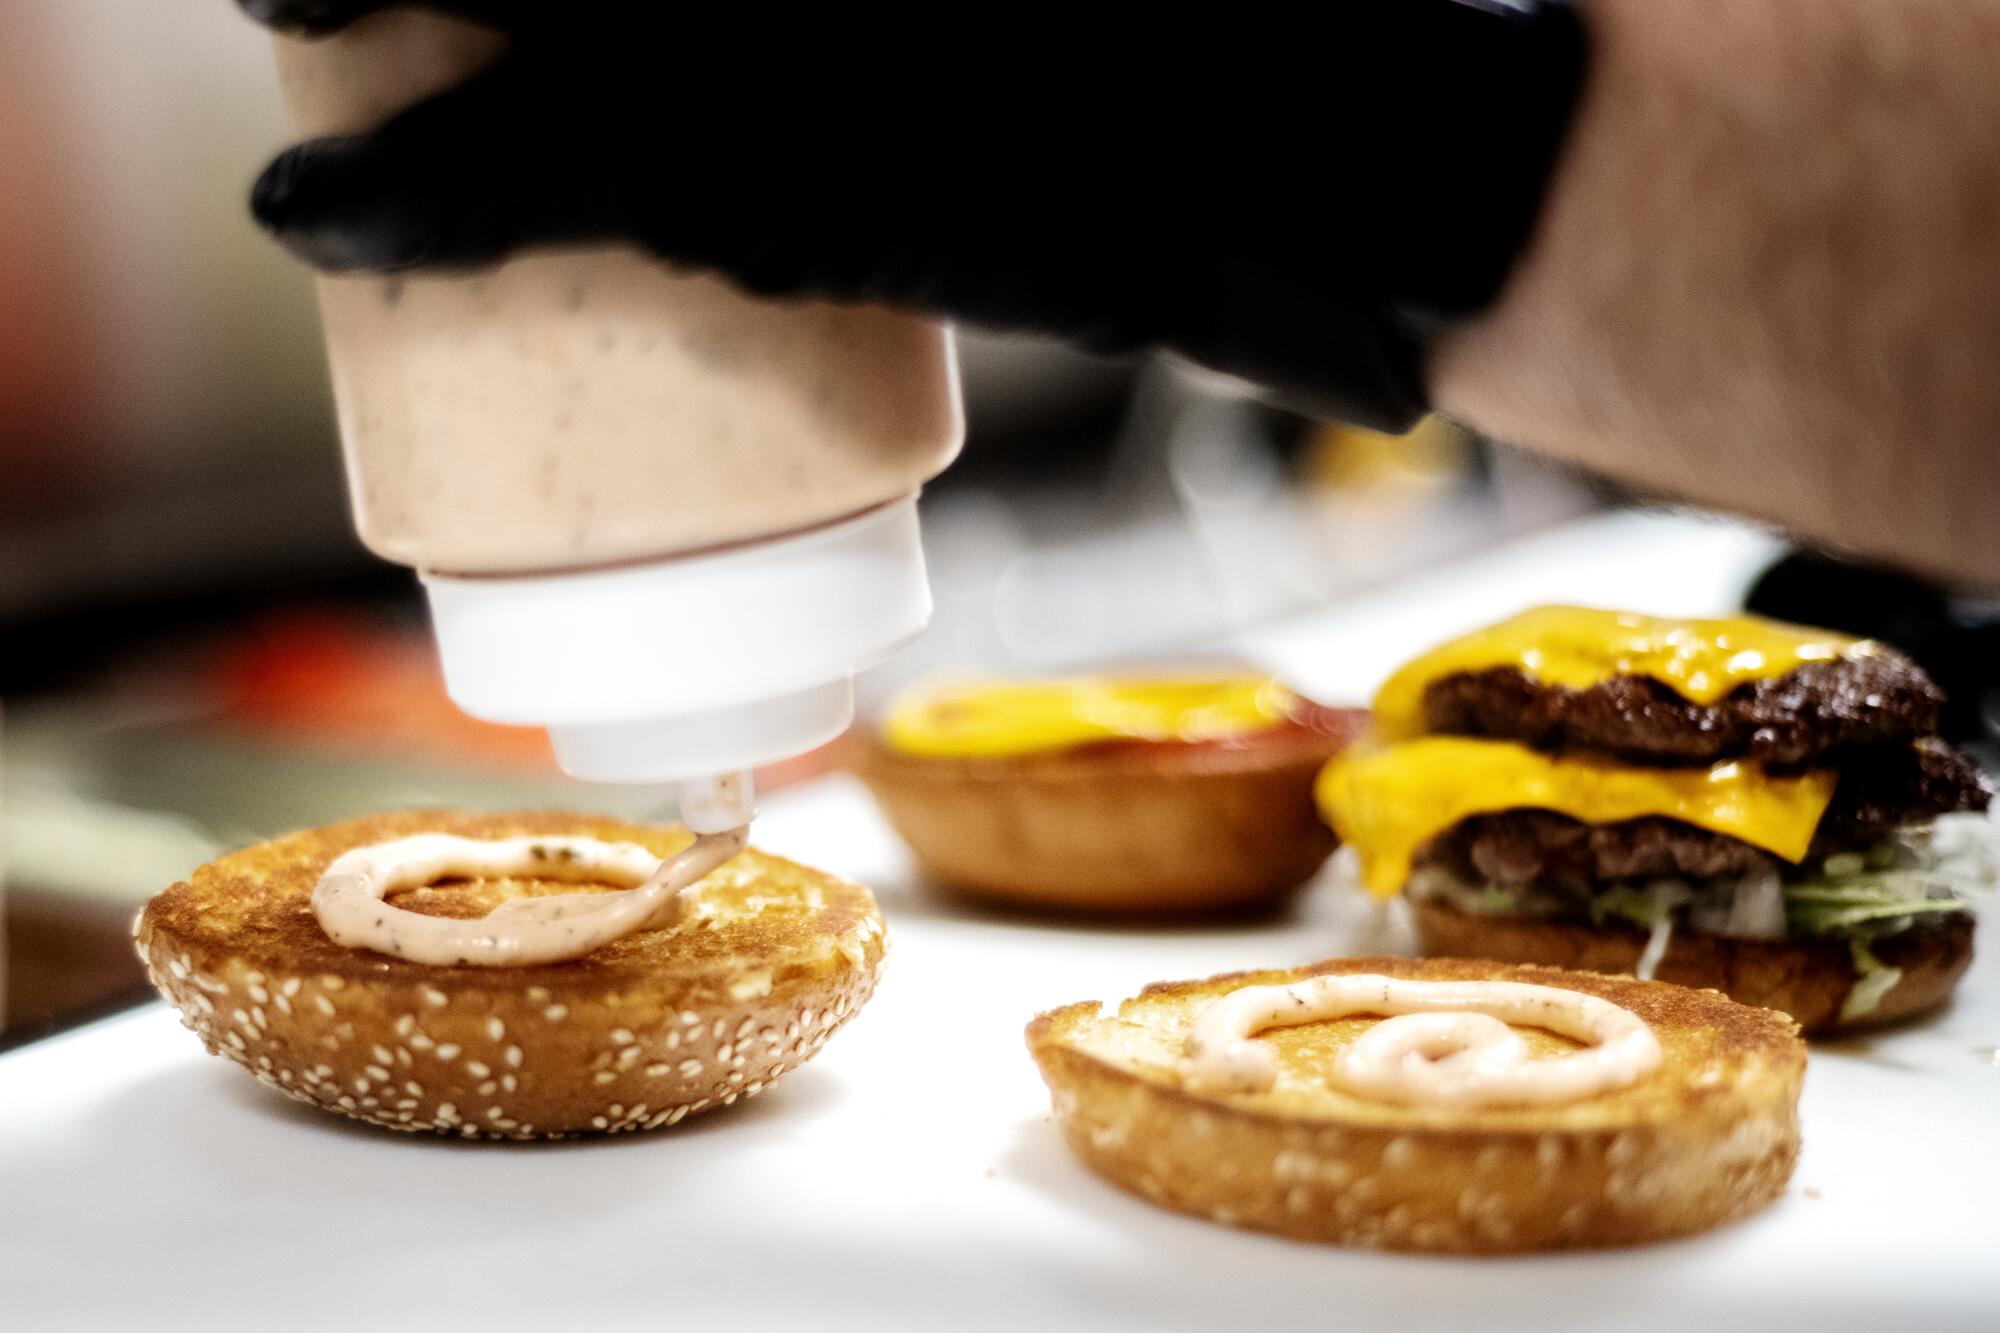 A photo of a hand squeezing a bottle of house-made sauce onto the tops of burger buns.